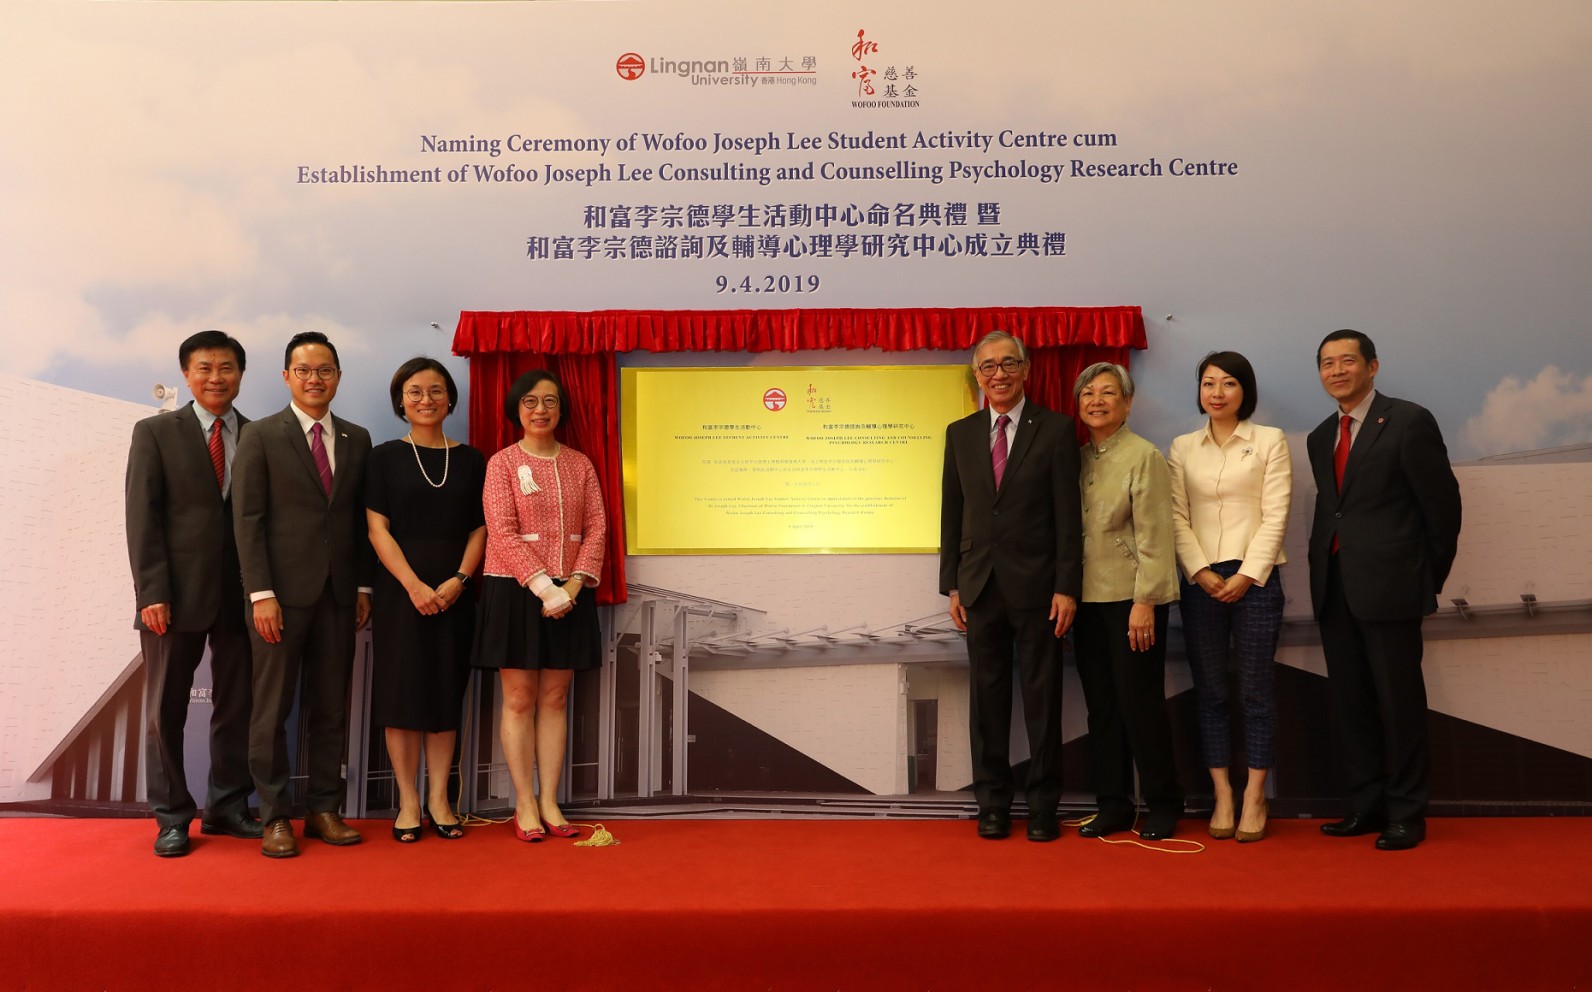 Prof Sophia CHAN Siu-Chee(4th left), Dr Joseph LEE(4th right), Mr IP Shing-Hing(1st right), Prof Leonard K CHENG(1st left) and other officiating guests host the Naming Ceremony.